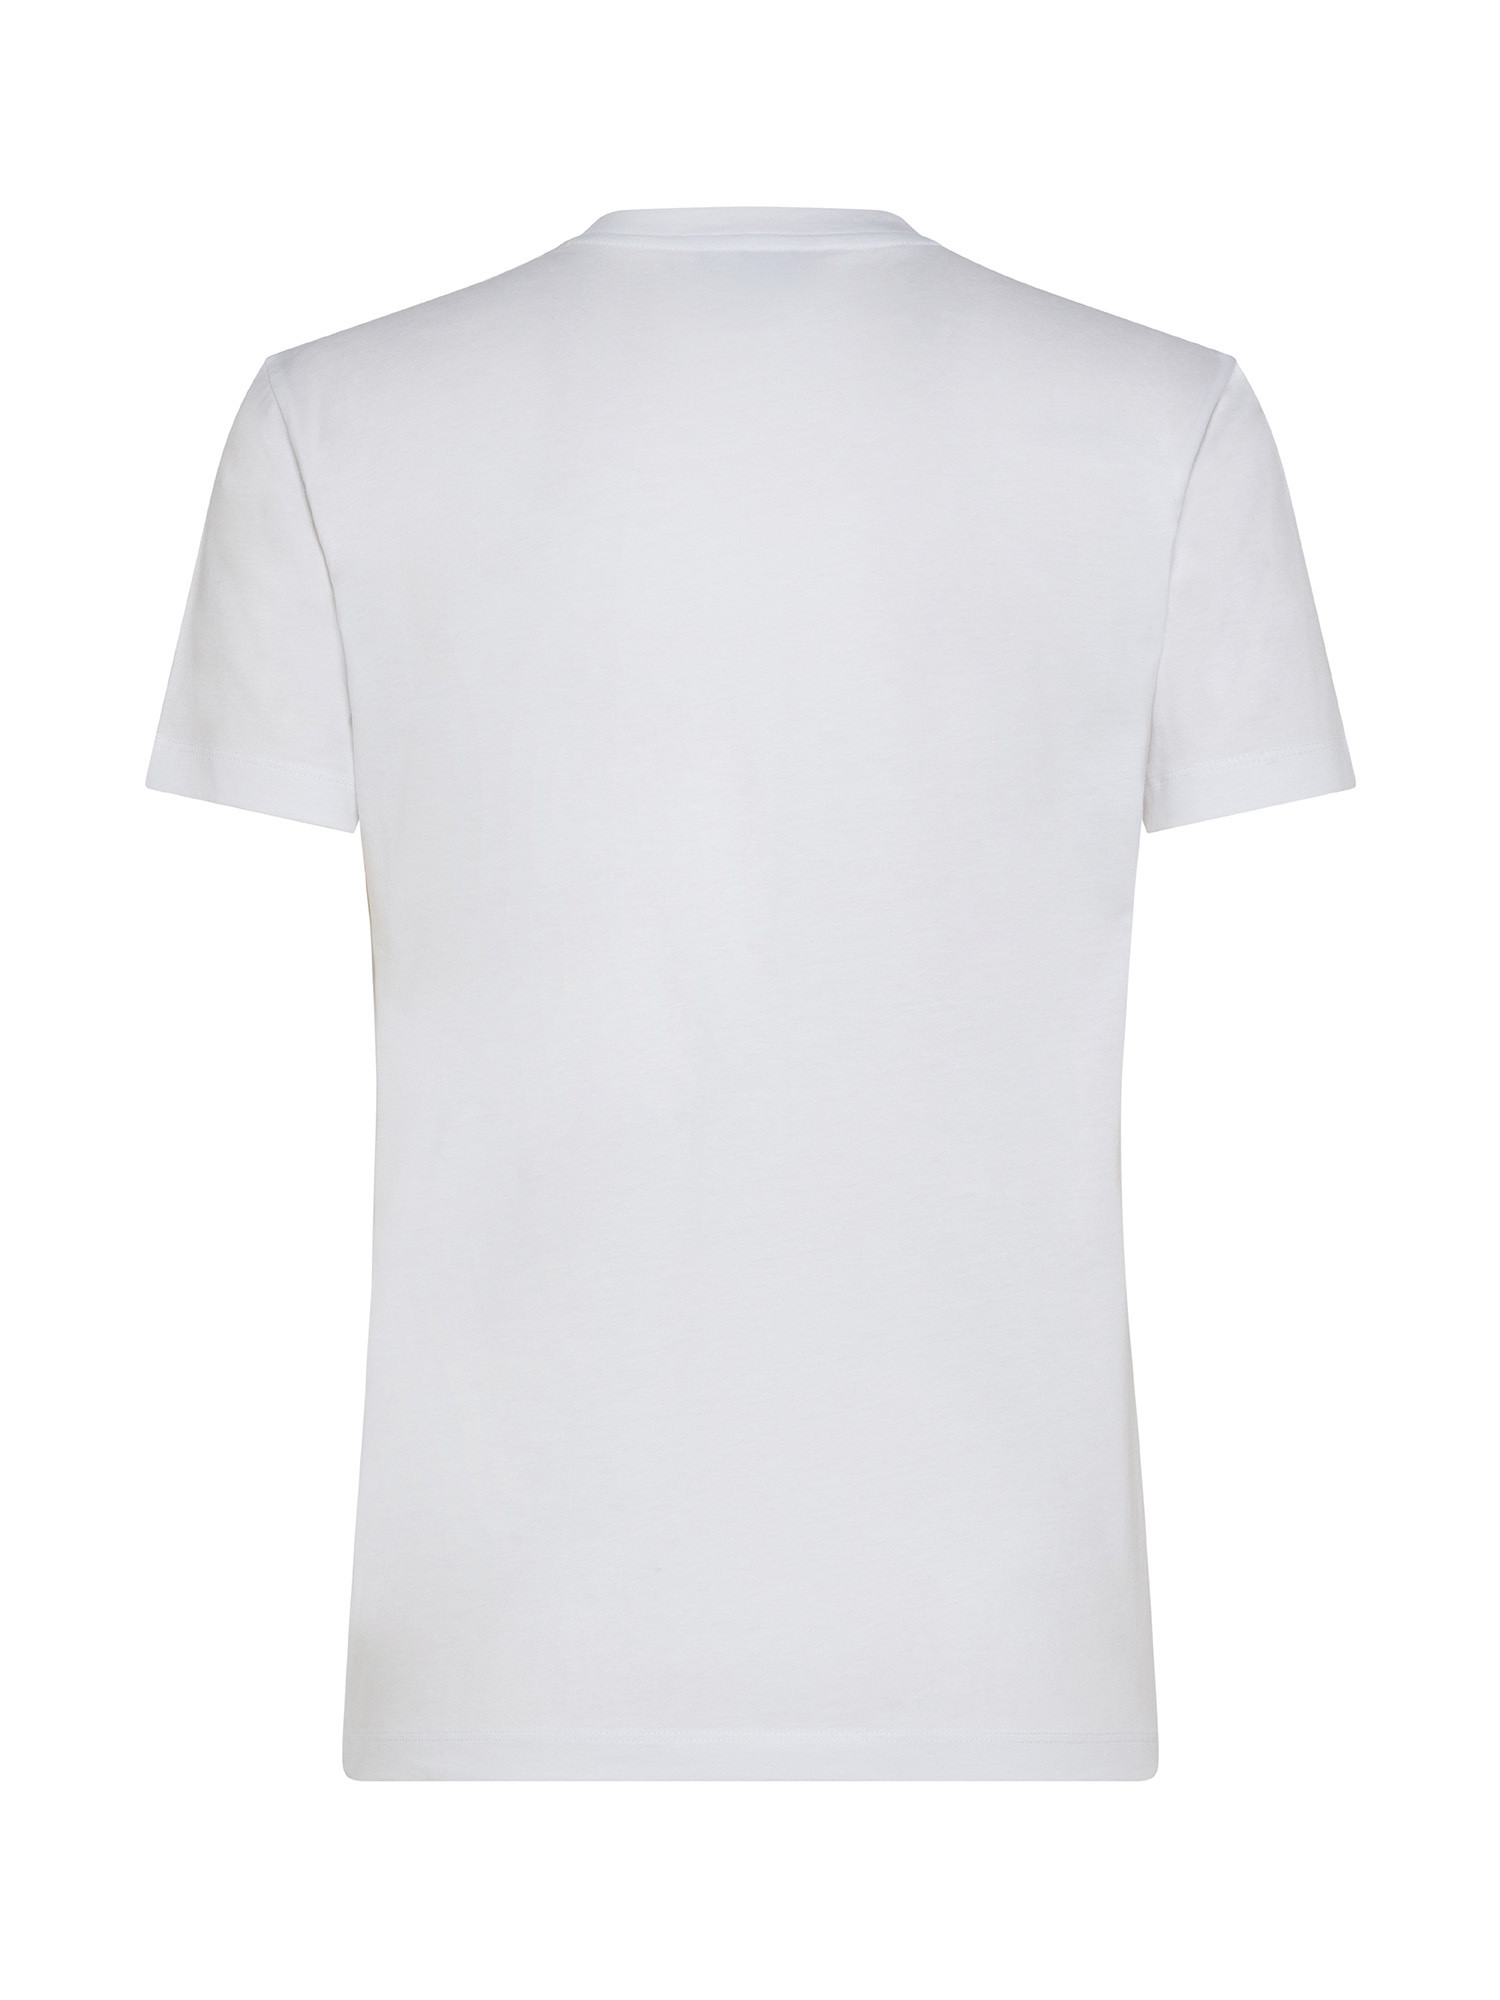 Emporio Armani - T-shirt in cotone con stampa, Bianco, large image number 1